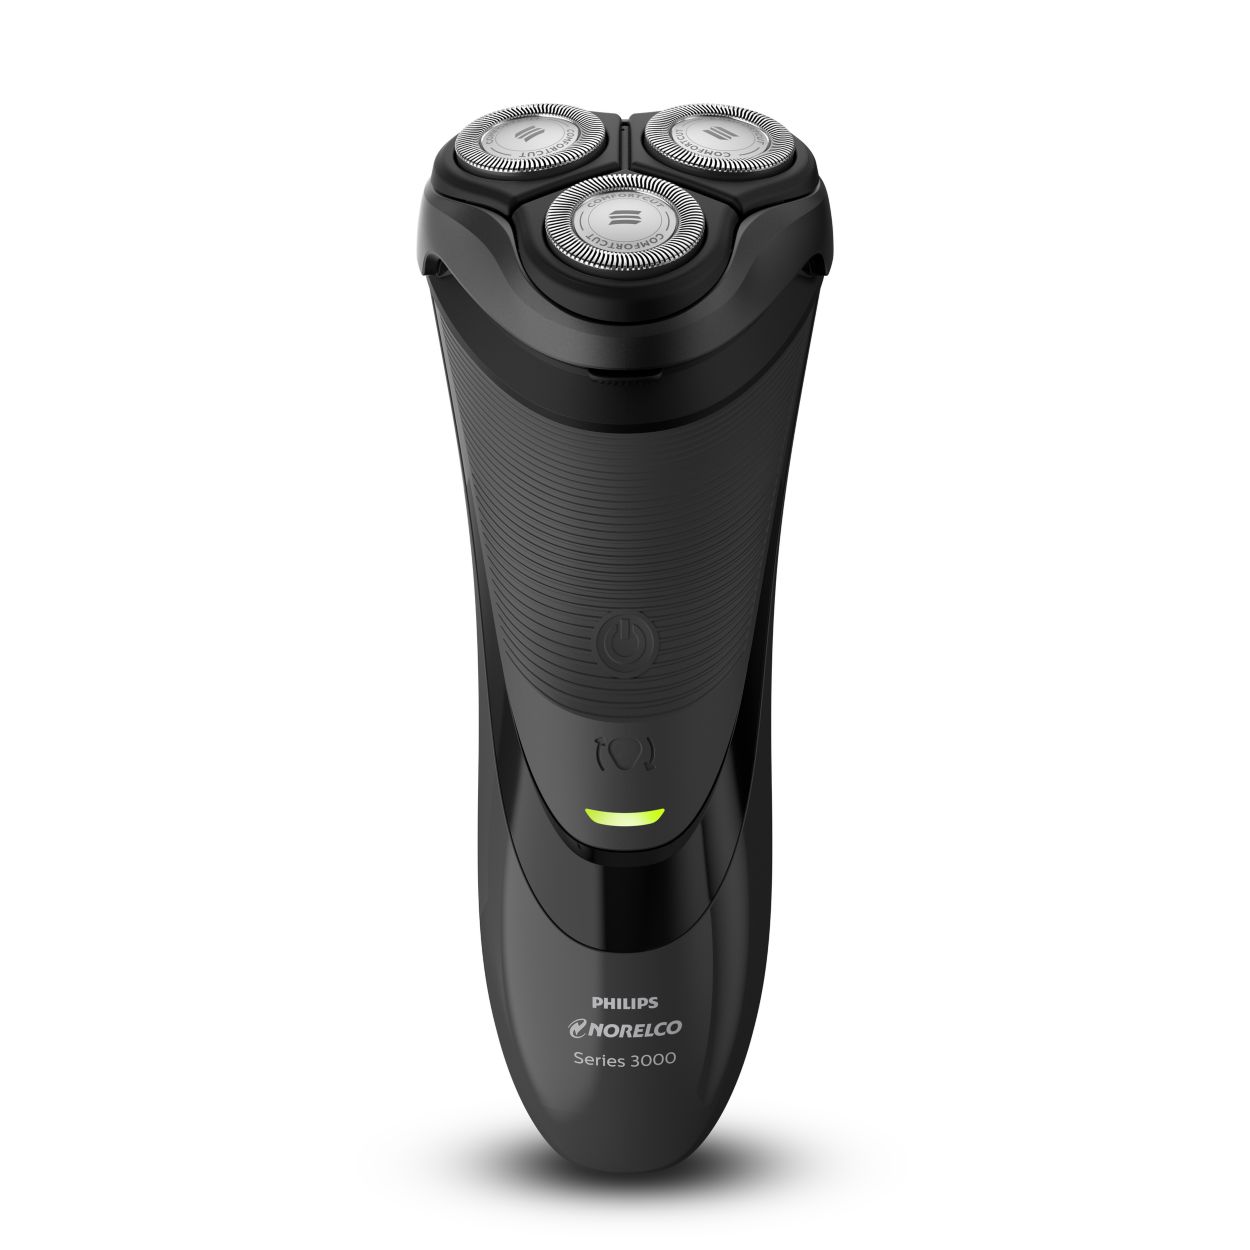 Shaver 3100 Dry electric shaver, Series 3000 S3310/81 | Norelco